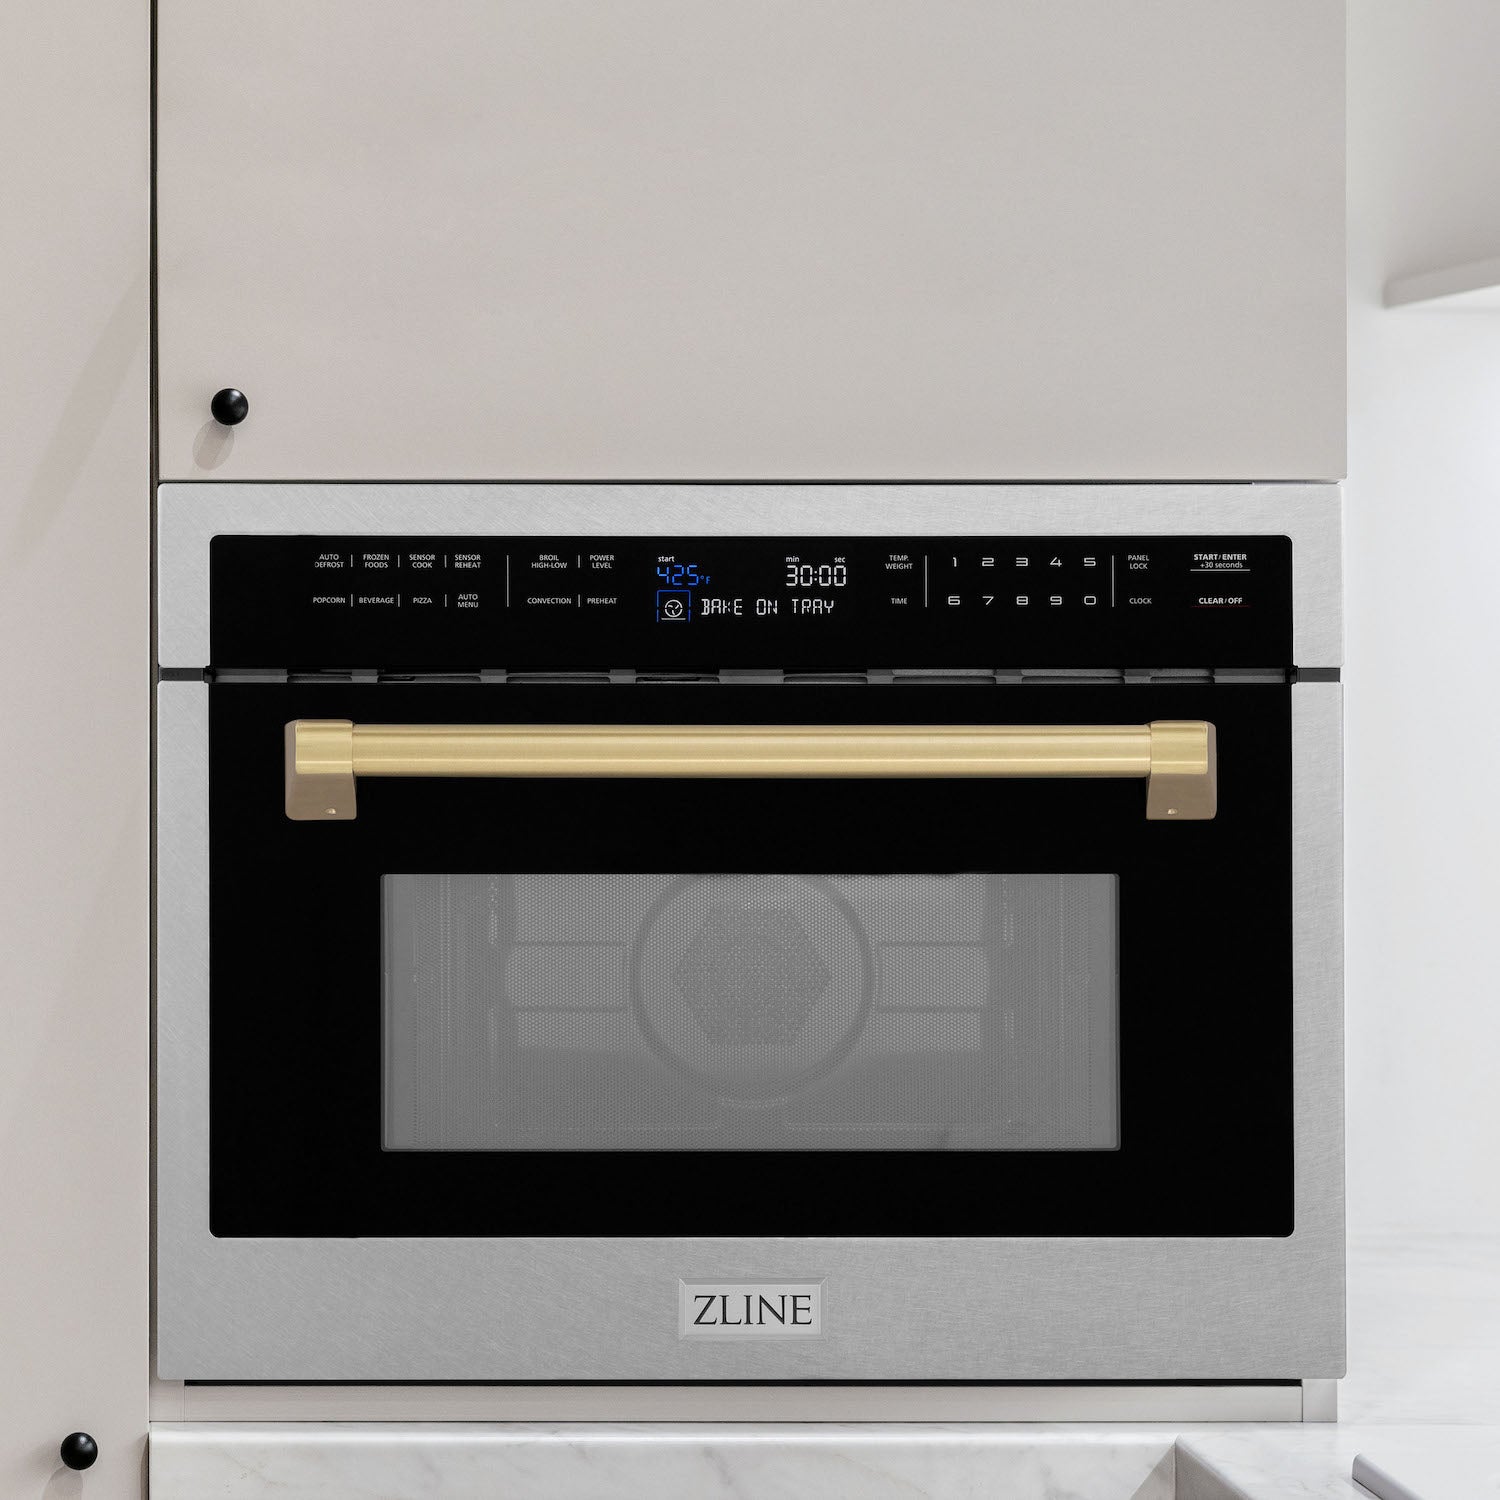 ZLINE Autograph Edition 24 in. 1.6 cu ft. Built-in Convection Microwave Oven in DuraSnow Stainless Steel with Champagne Bronze Accents built-in to white kitchen wall.